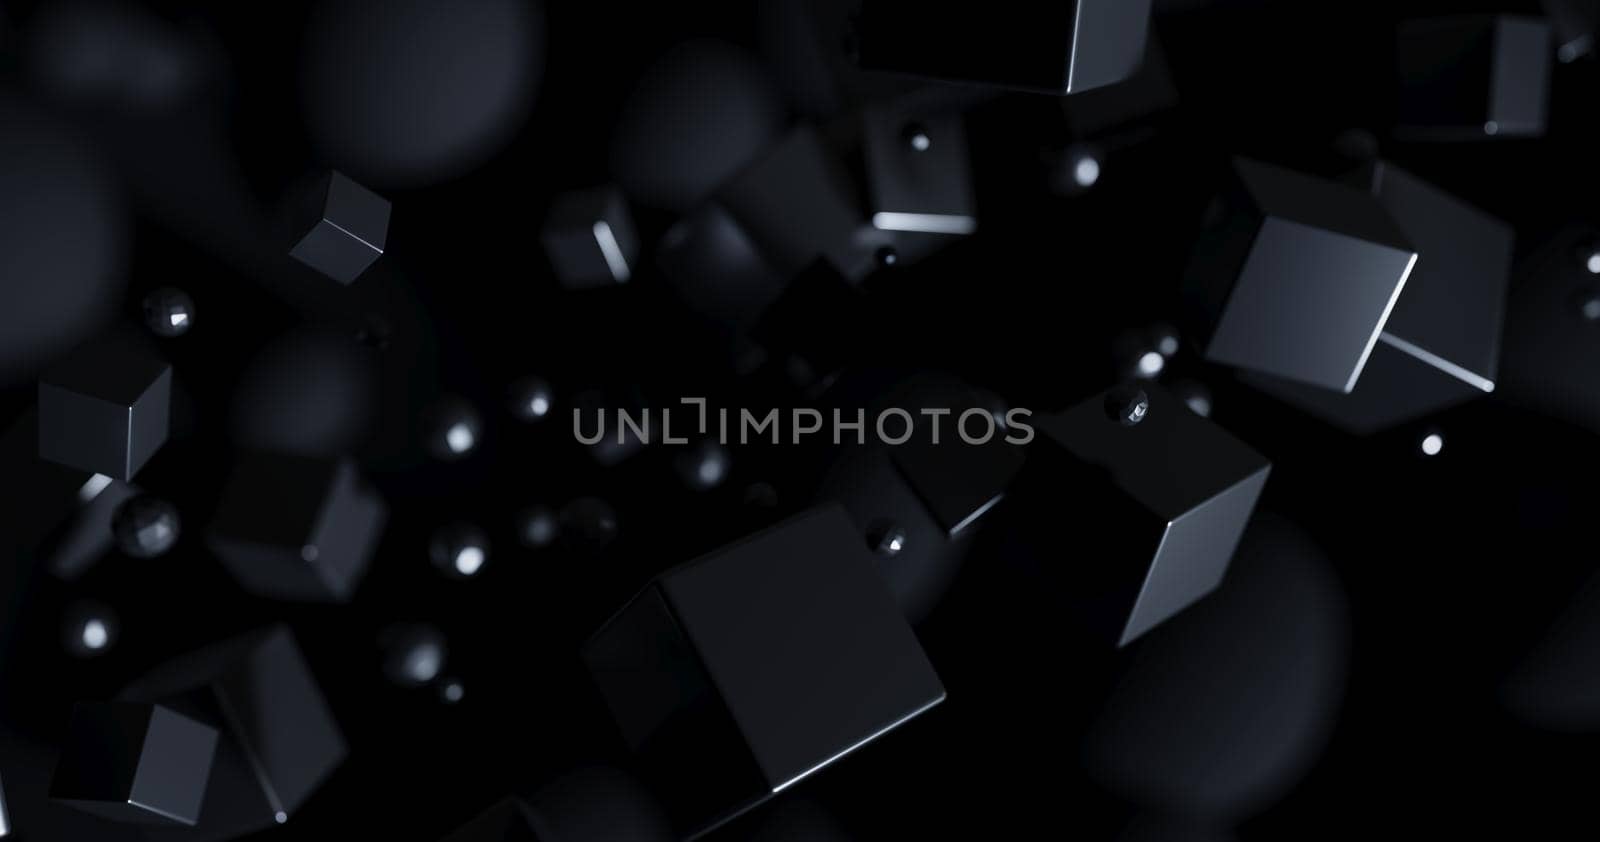 Polygonal objects in dark space, abstract futuristic black background design, 3d rendering.